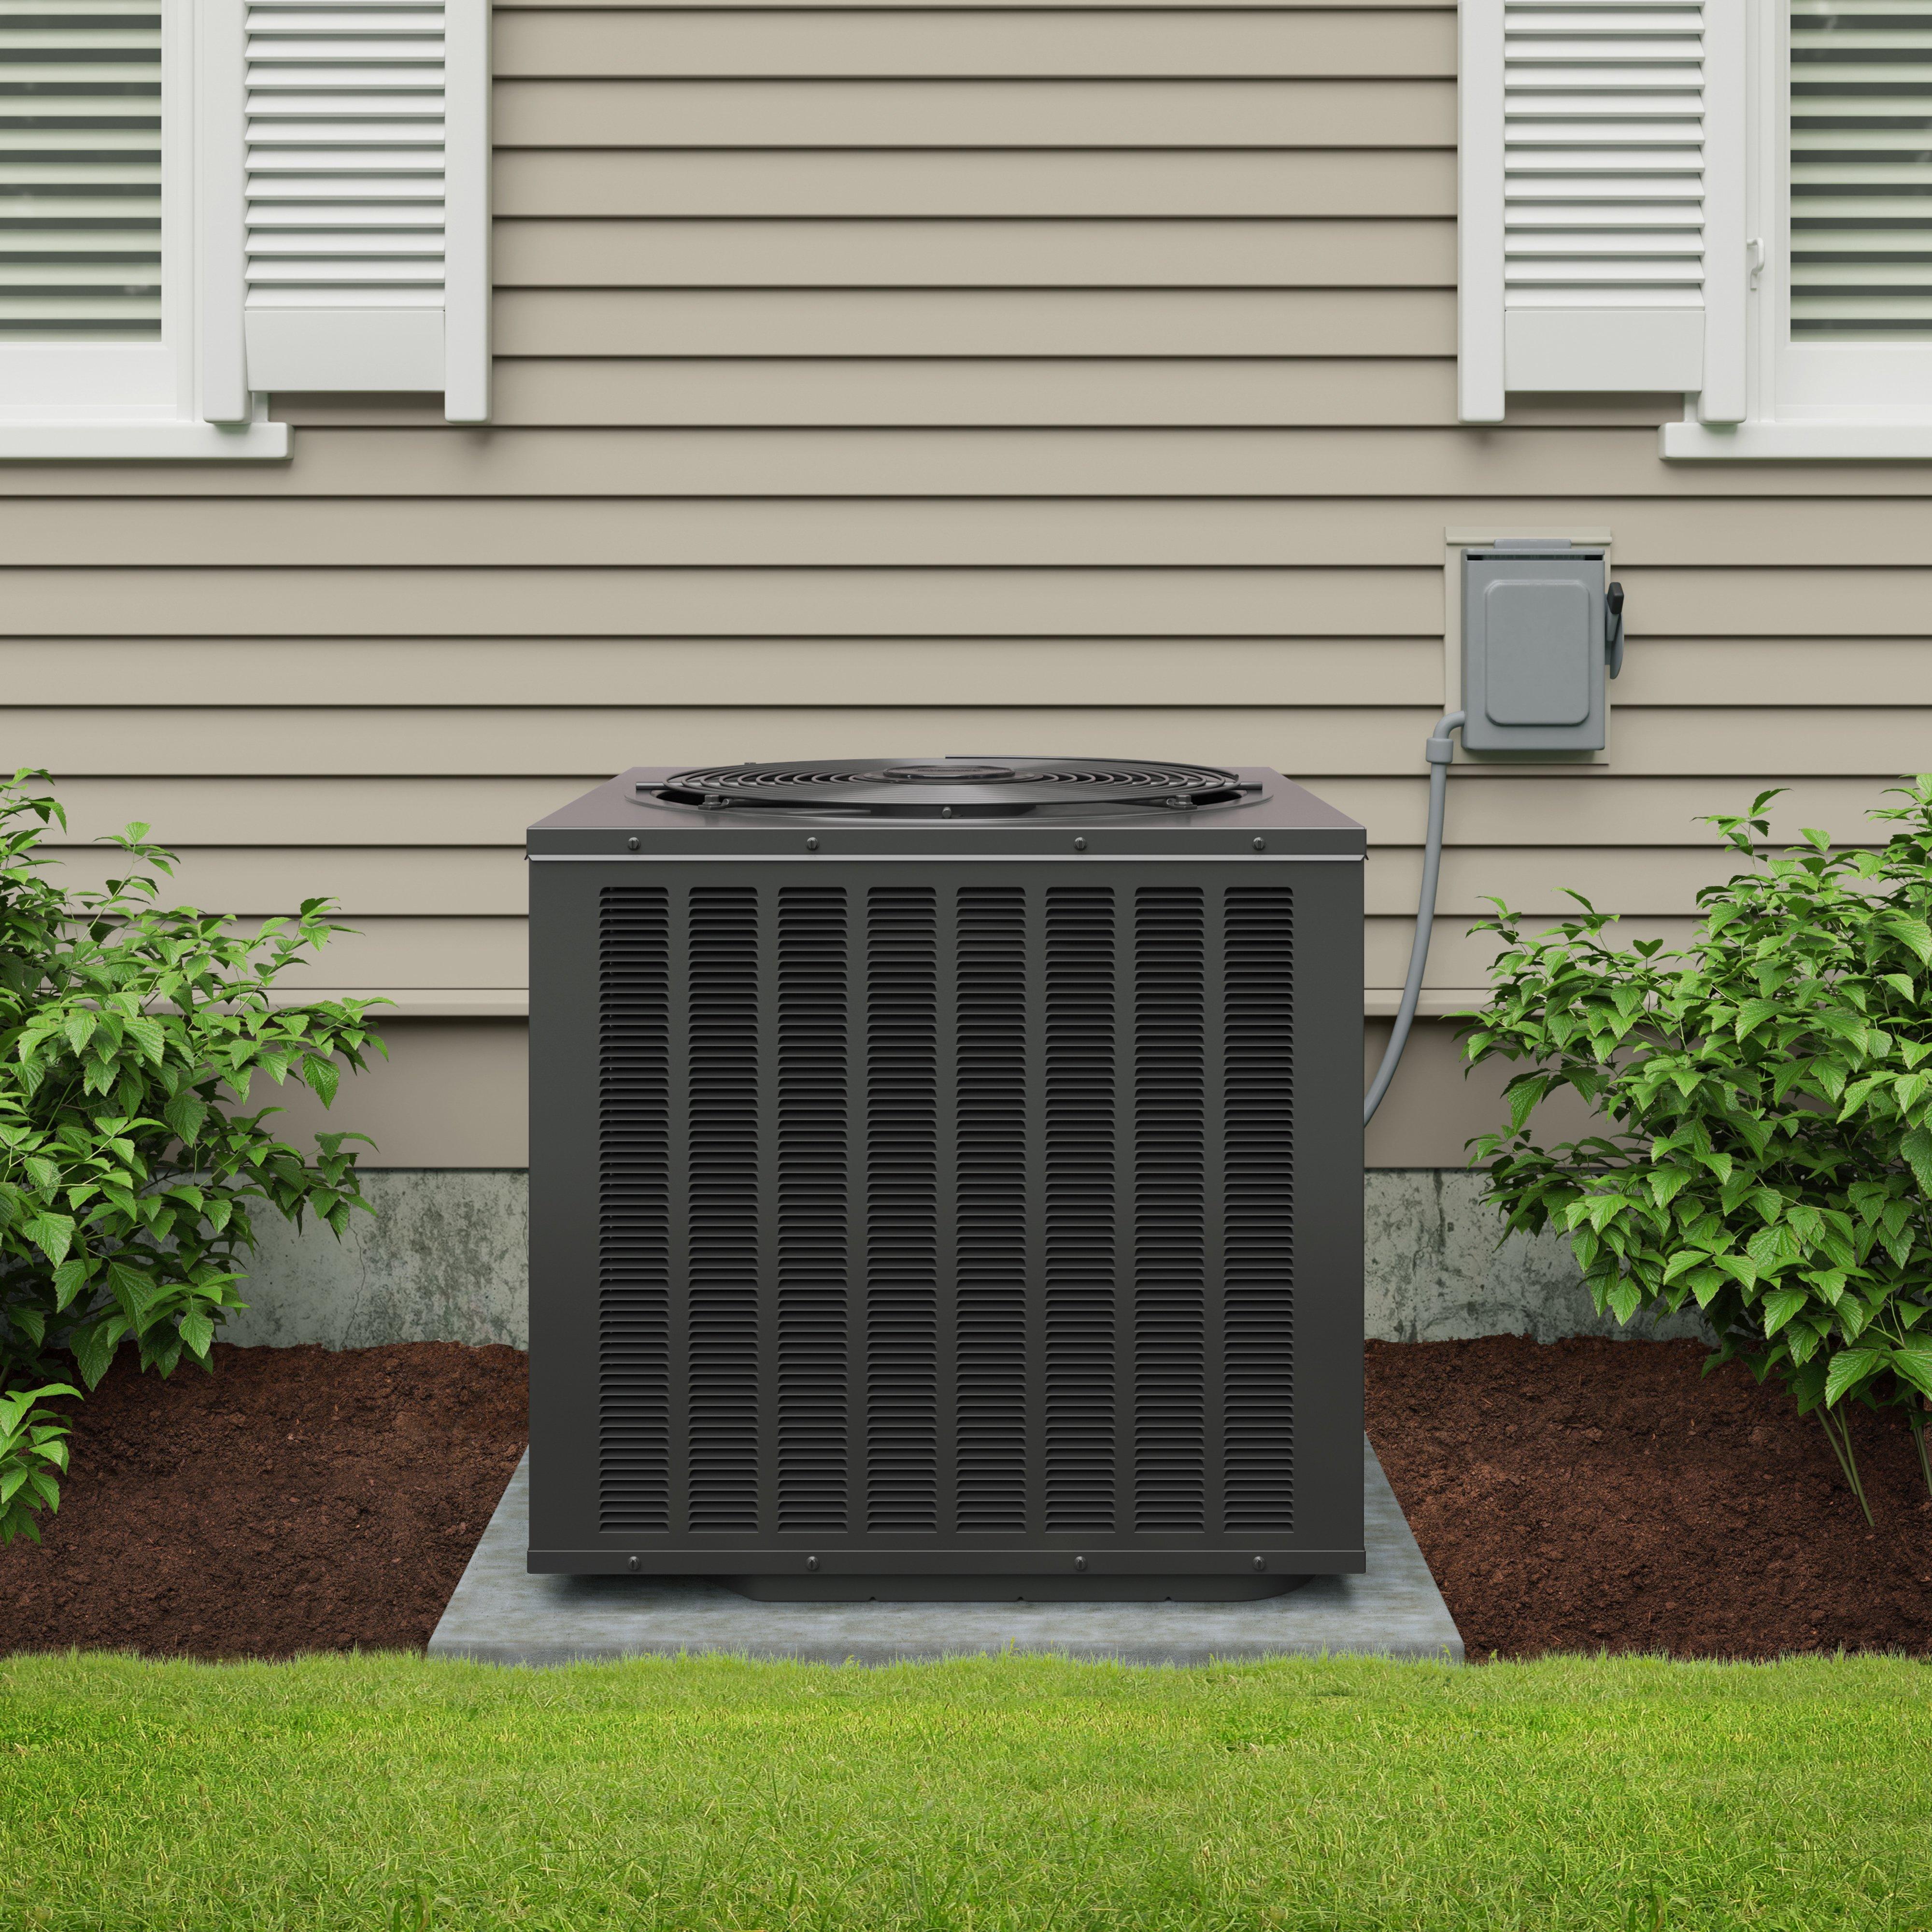 A black Durastar air conditioner condenser on a concrete pad outside of a home with beige siding and white shutters.